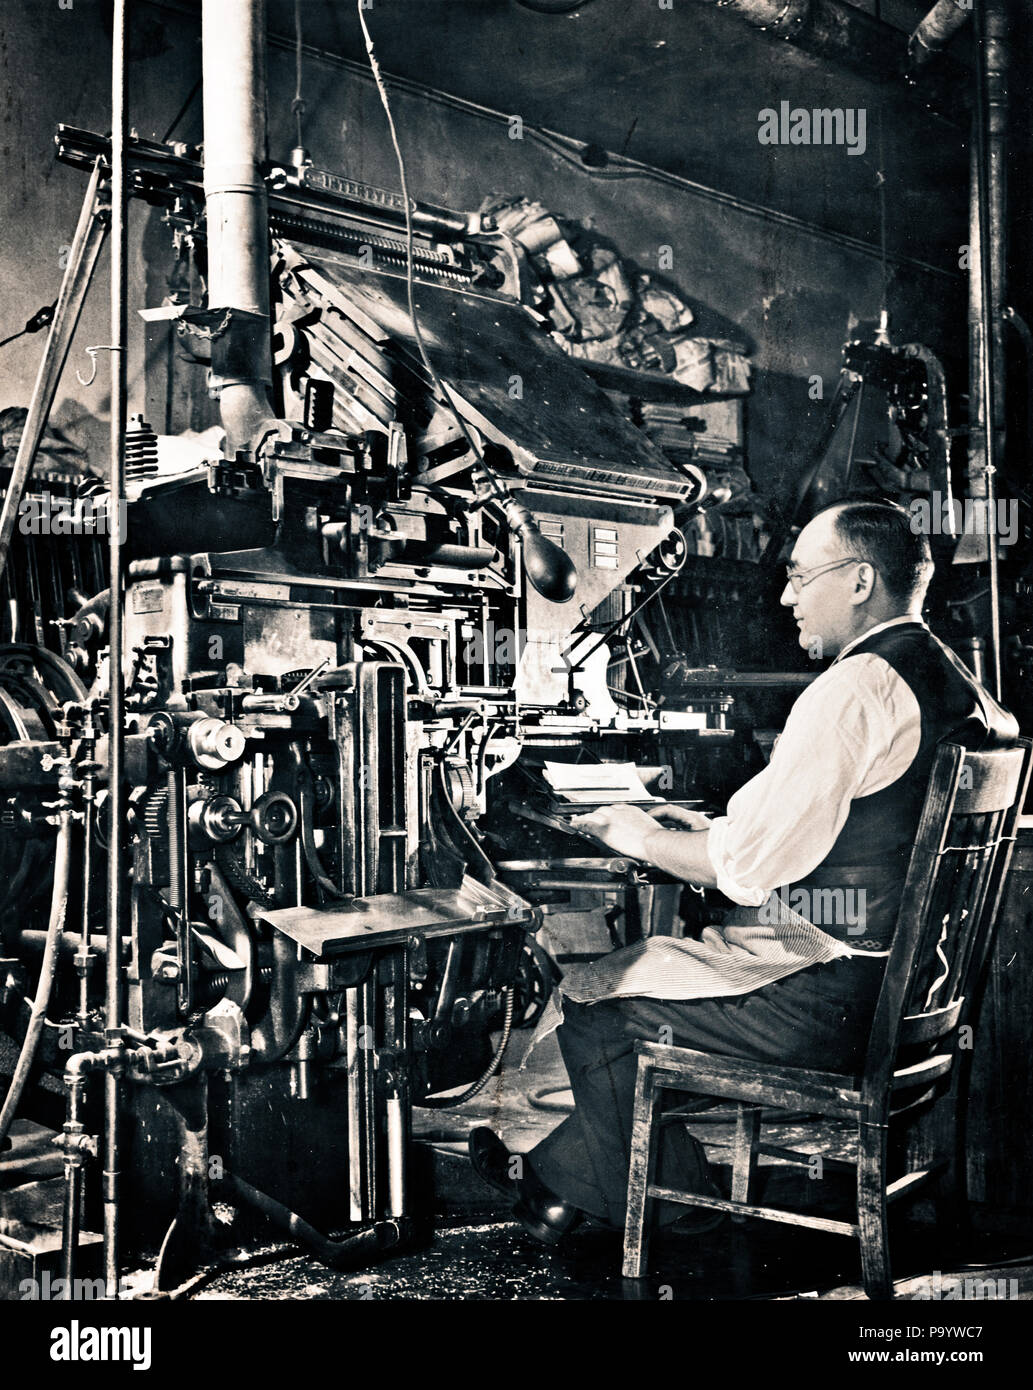 1930s ANONYMOUS MAN SEATED AT COMPOSING KEYBOARD OF LINOTYPE HOT METAL TYPESETTING MACHINE  - q43089 CPC001 HARS MALES MECHANICAL MIDDLE-AGED B&W MIDDLE-AGED MAN SKILL OCCUPATION SKILLS LABOR EMPLOYMENT OCCUPATIONS TYPE ANONYMOUS COMPOSE EMPLOYEE TYPESETTING LETTERPRESS TYPESETTER BLACK AND WHITE CAUCASIAN ETHNICITY LABORING OLD FASHIONED PUBLISHING Stock Photo